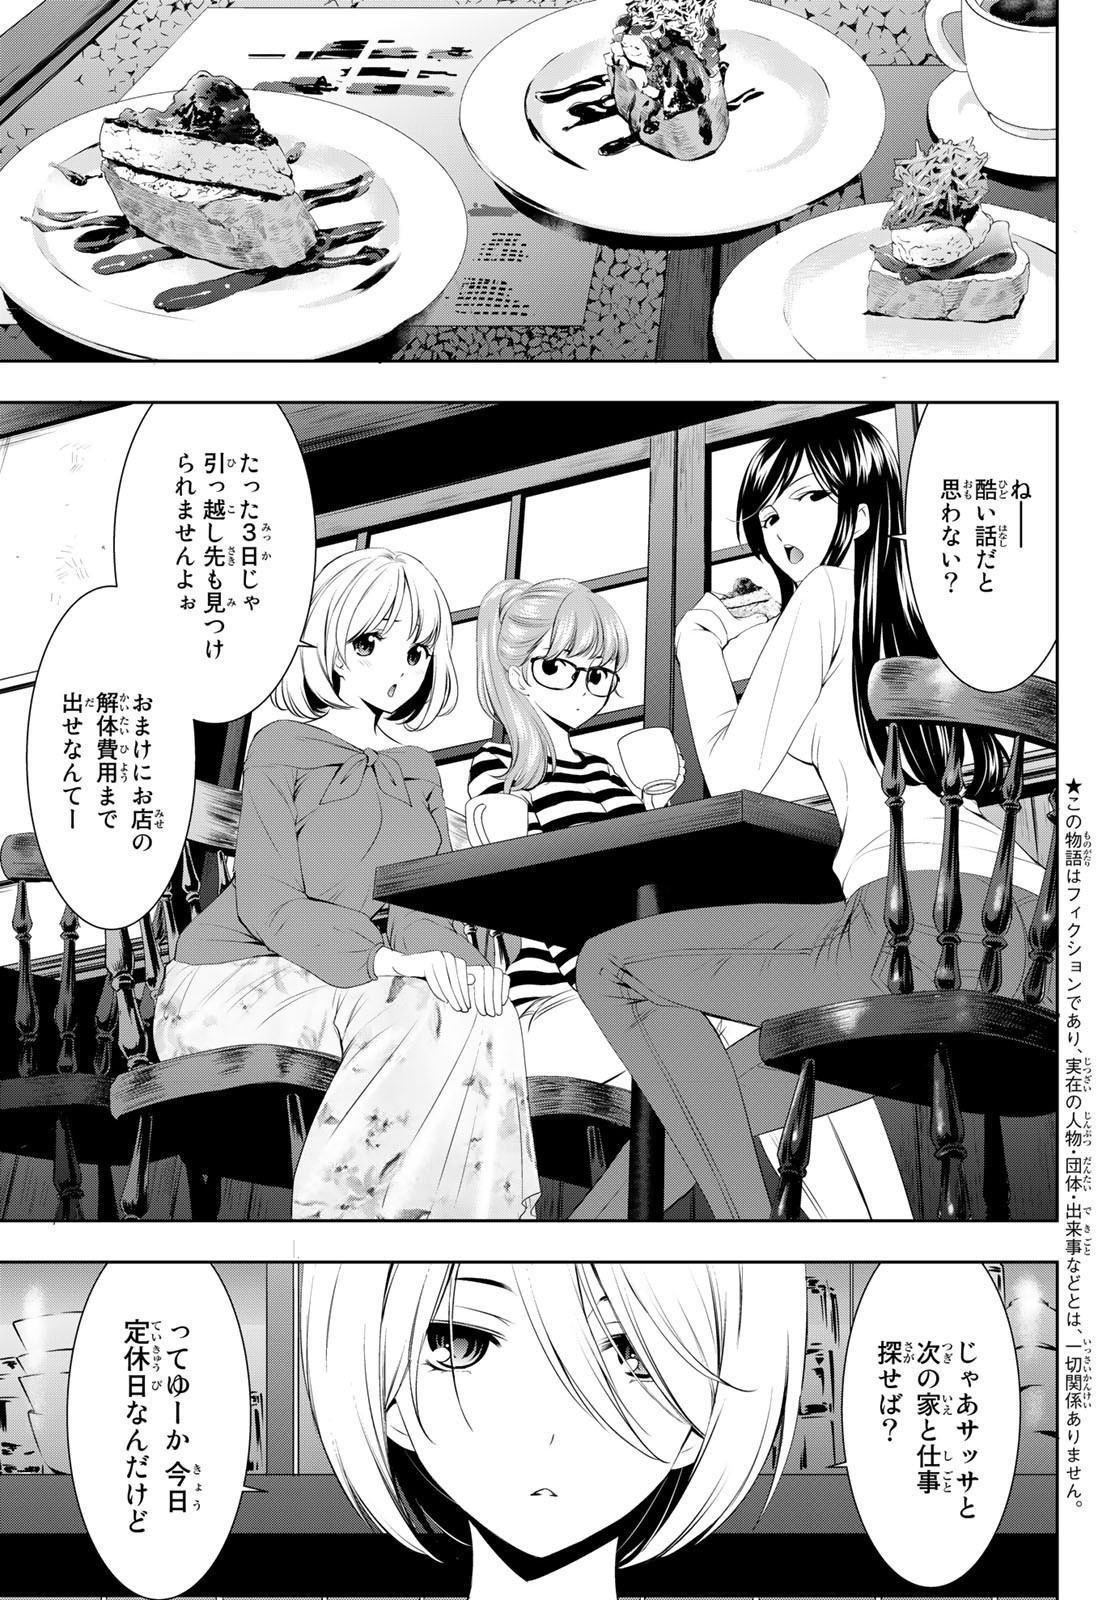 Goddess-Cafe-Terrace - Chapter 054 - Page 3